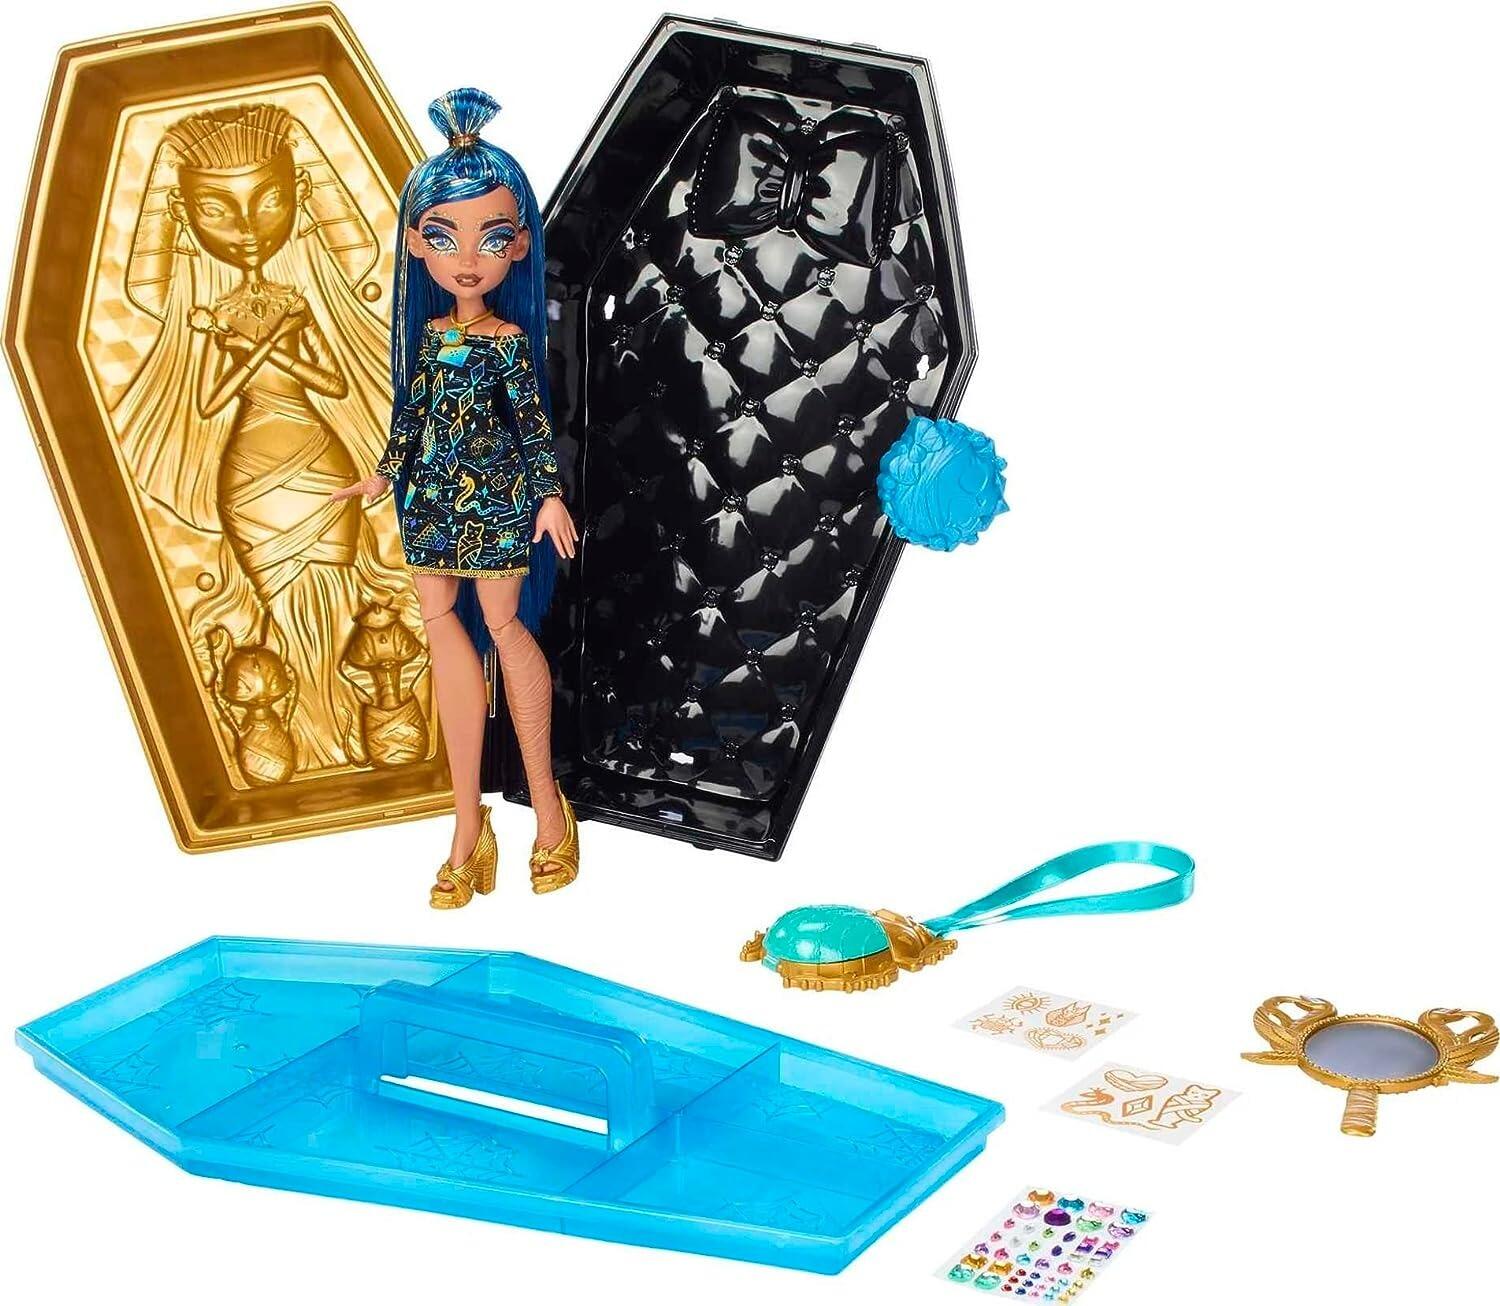 Monster High Cleo Golden Glam Case playset with doll